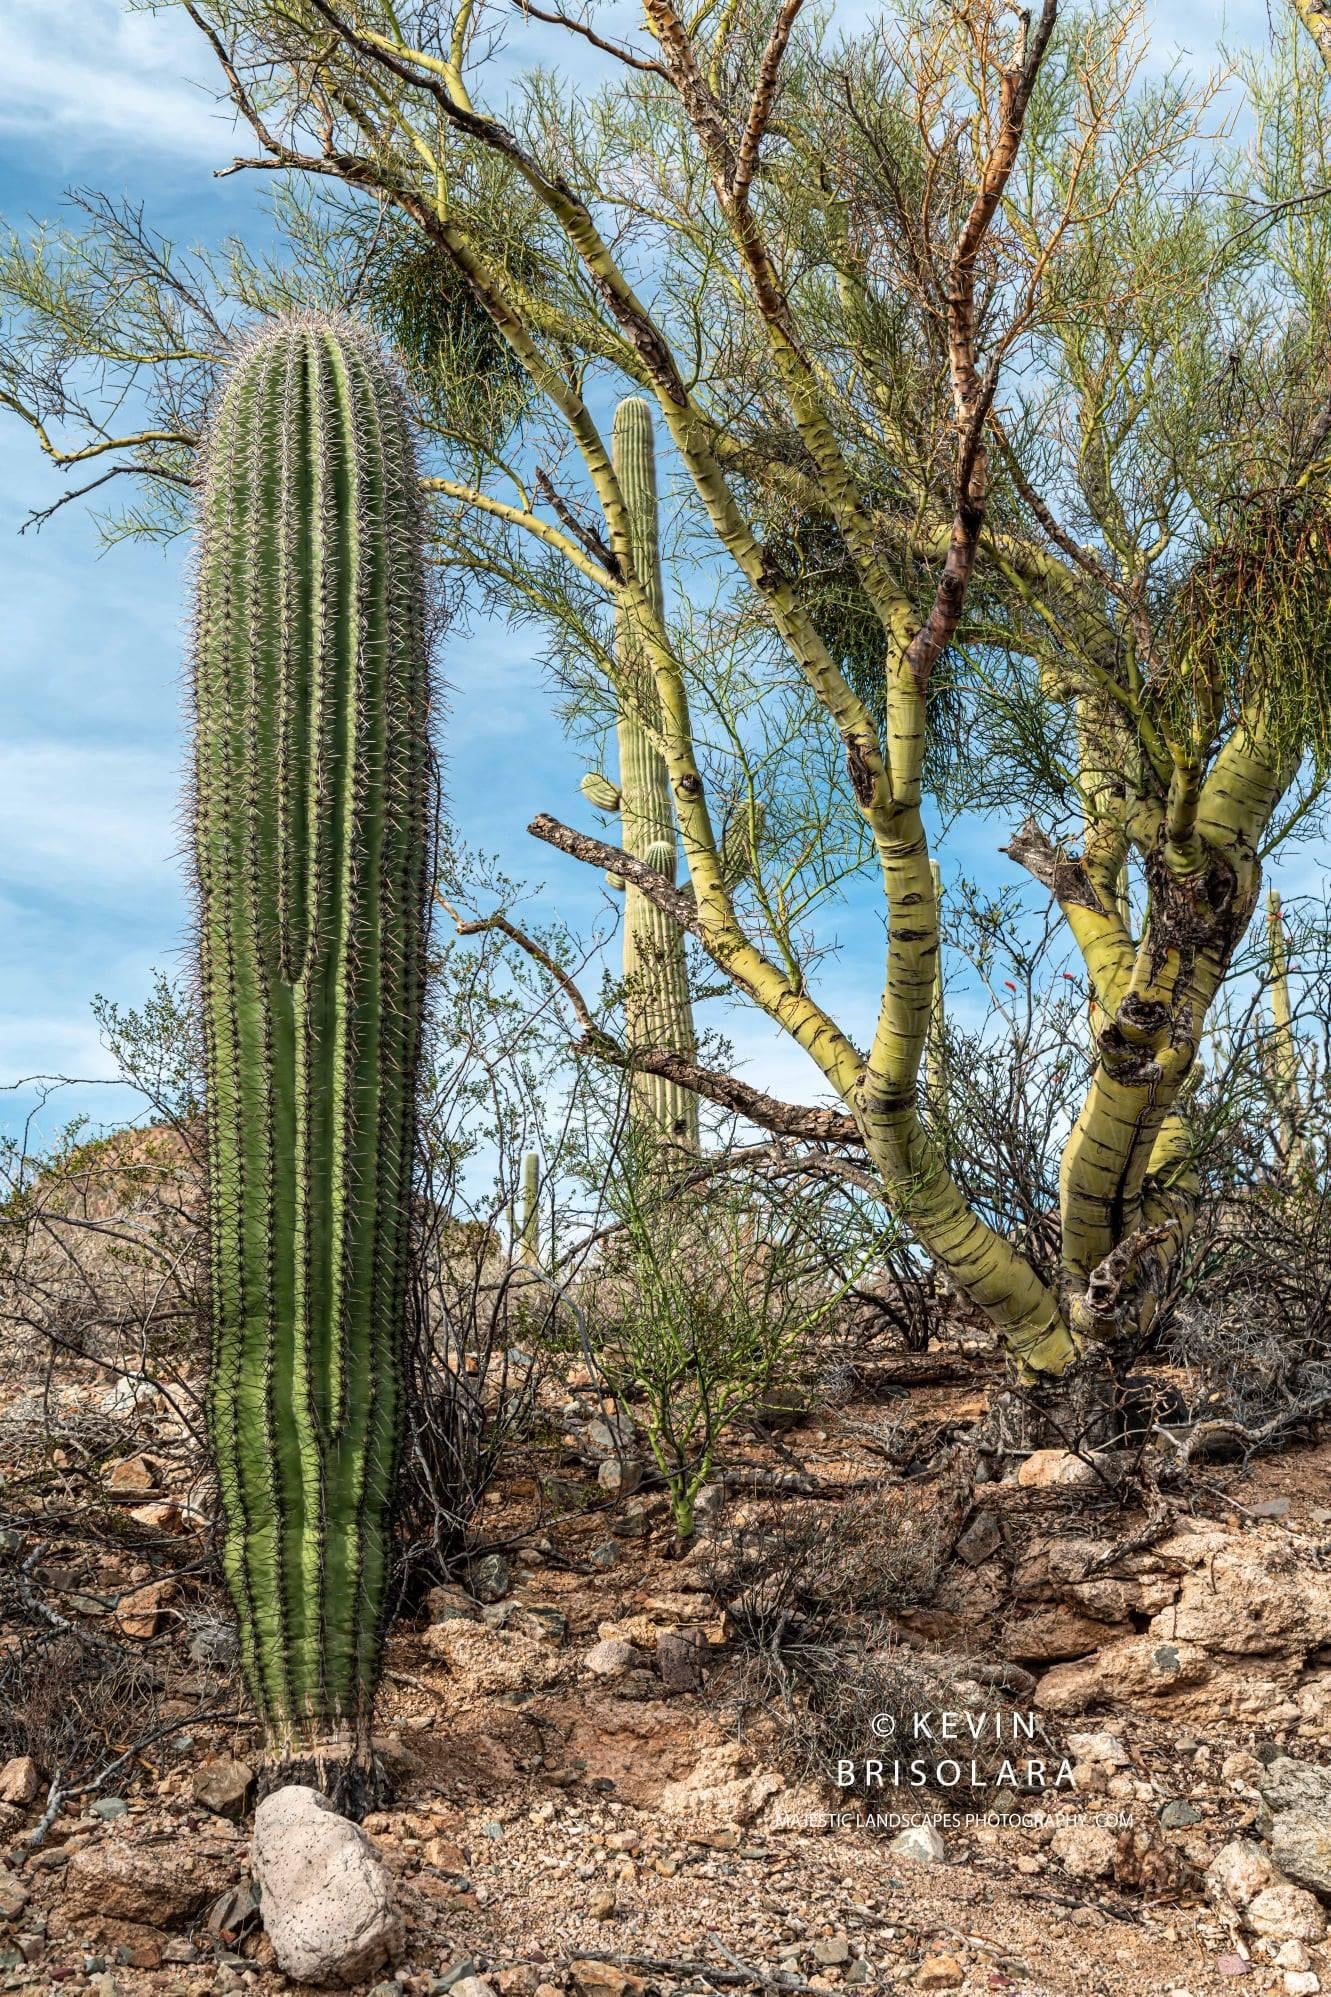 THE SAGUARO AND THE PALO VERDE TREE